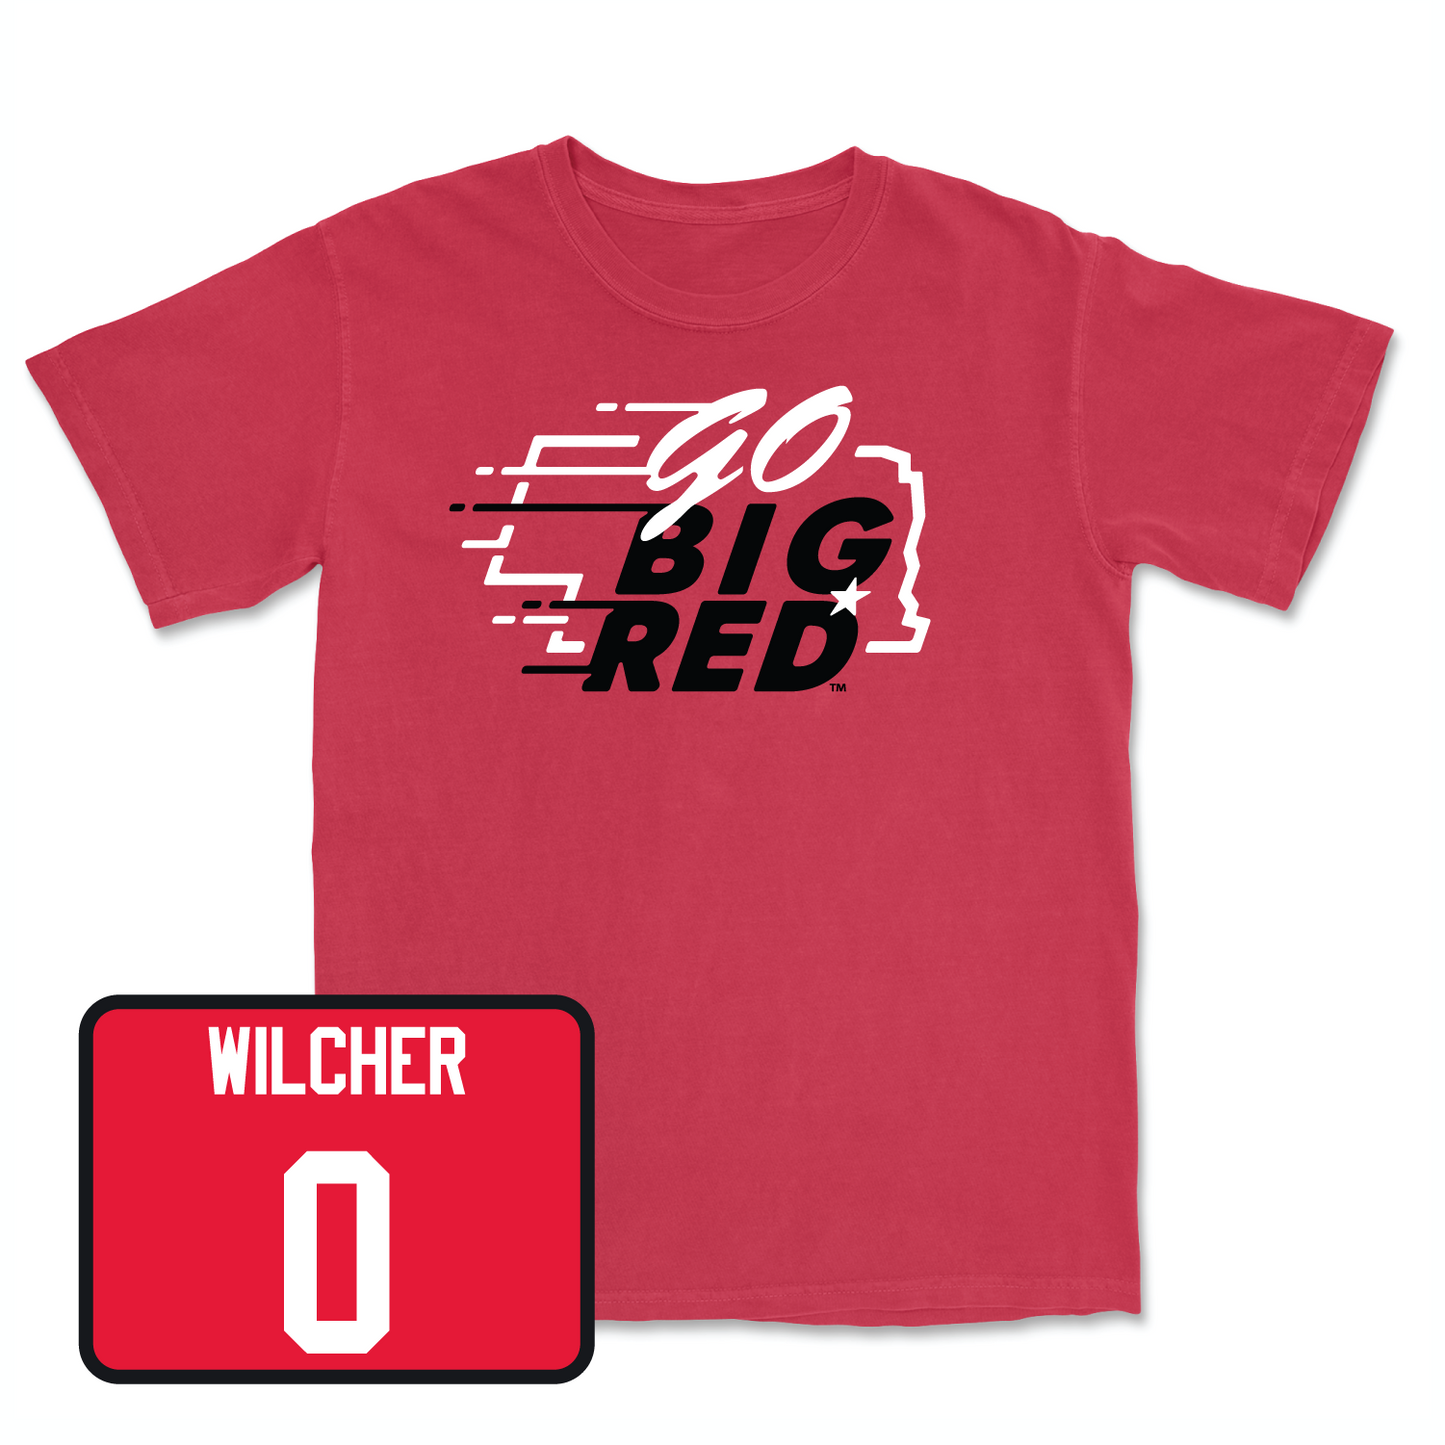 Red Men's Basketball GBR Tee Small / C.J. Wilcher | #0